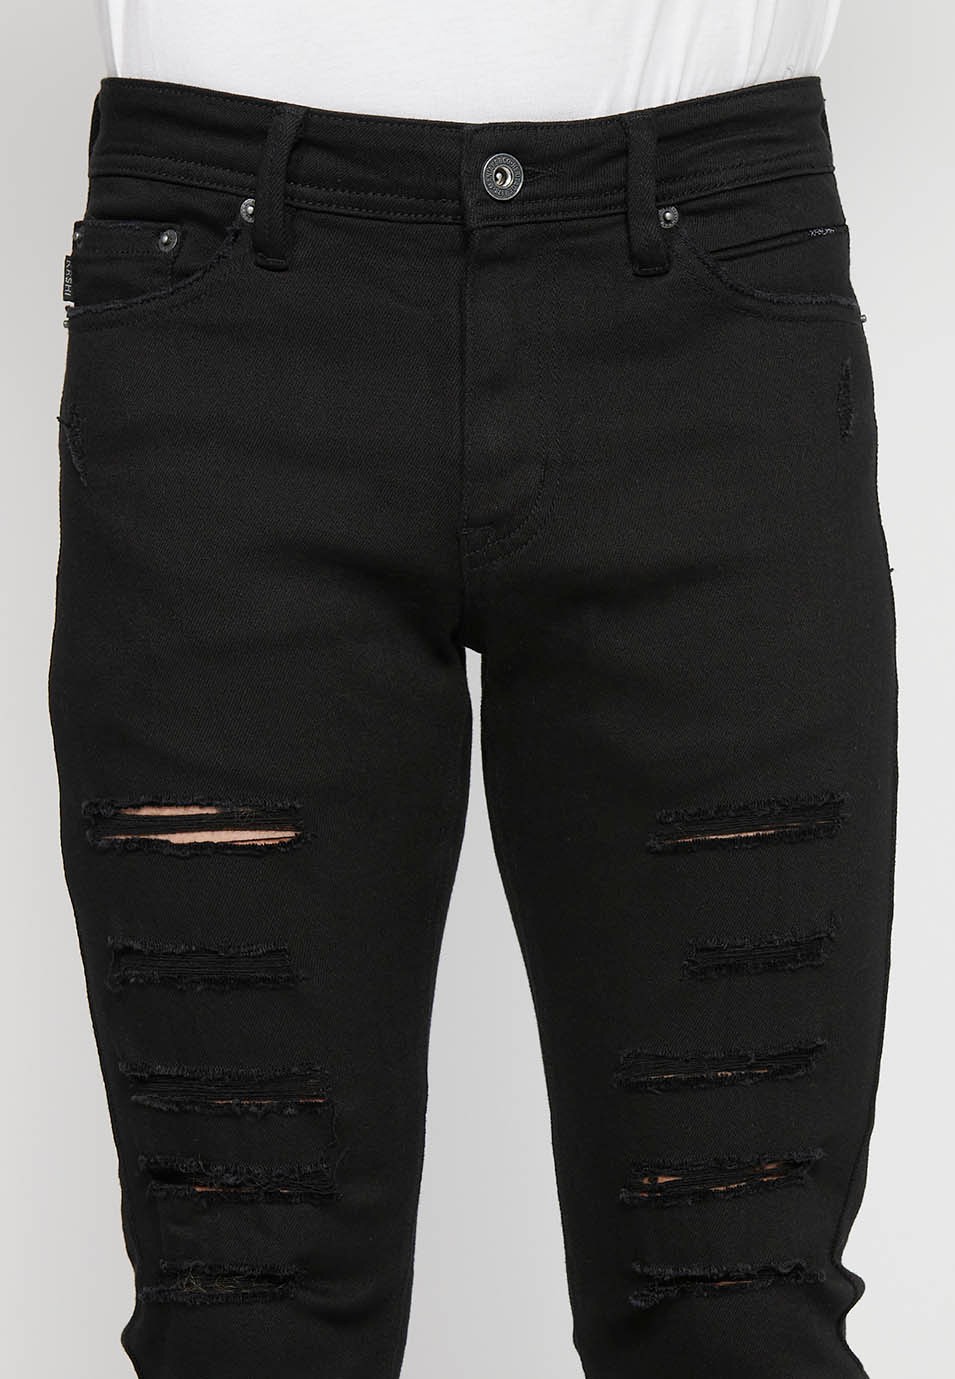 Long slim super skinny jeans with front closure with zipper and button in Black Denim Color for Men 5